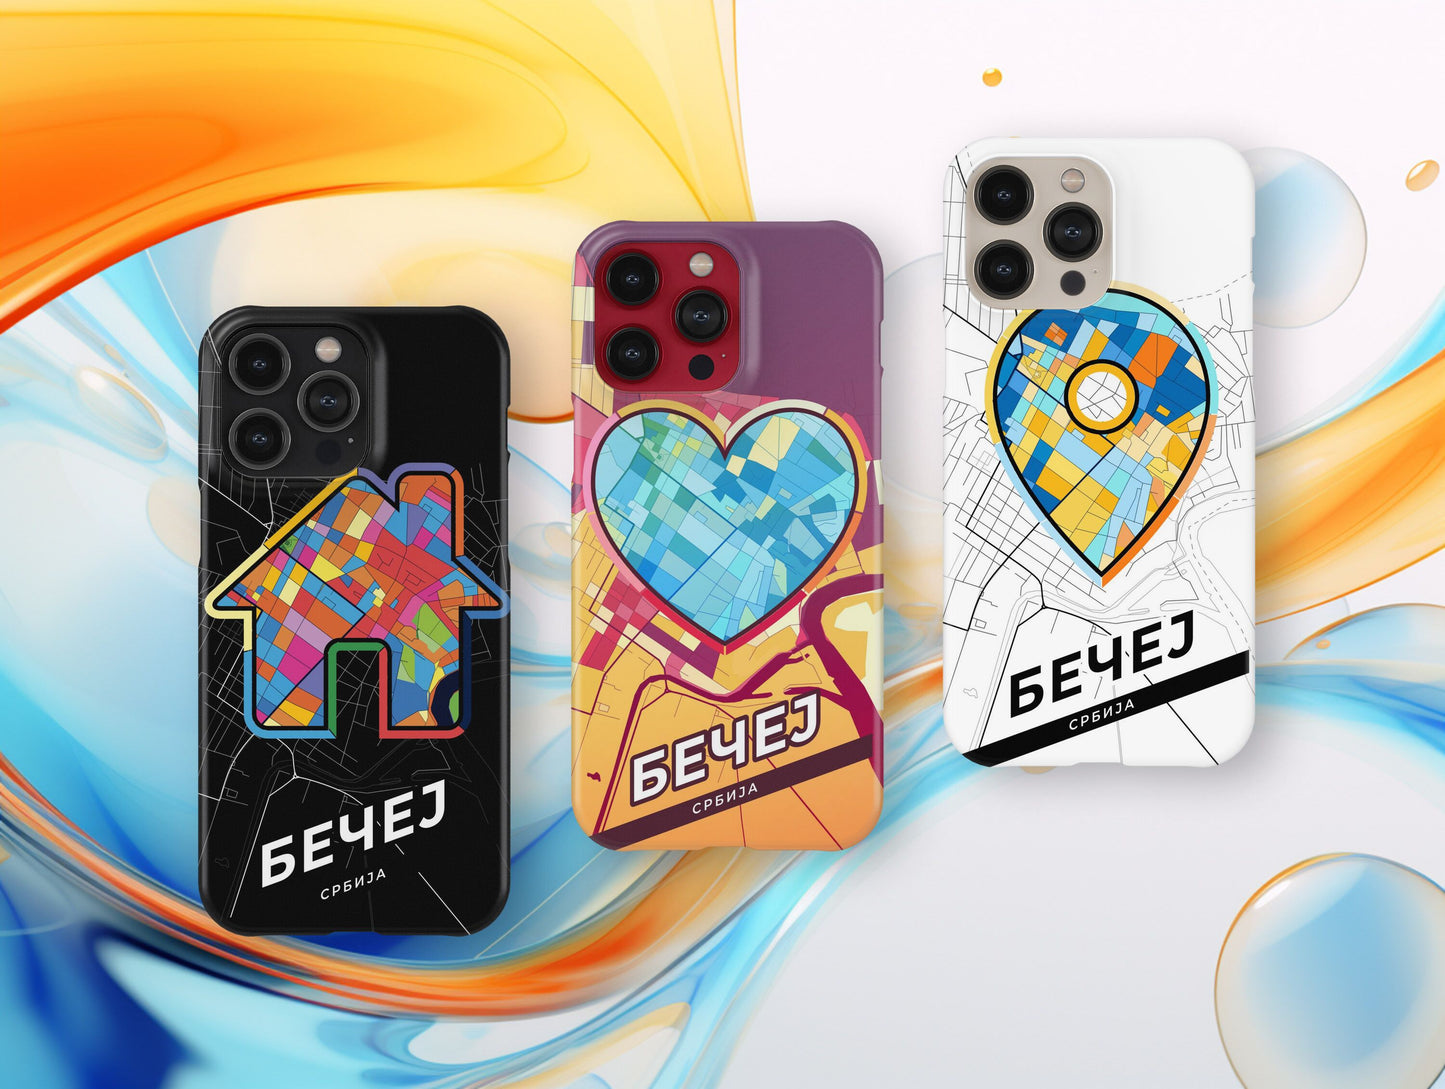 Bečej Serbia slim phone case with colorful icon. Birthday, wedding or housewarming gift. Couple match cases.